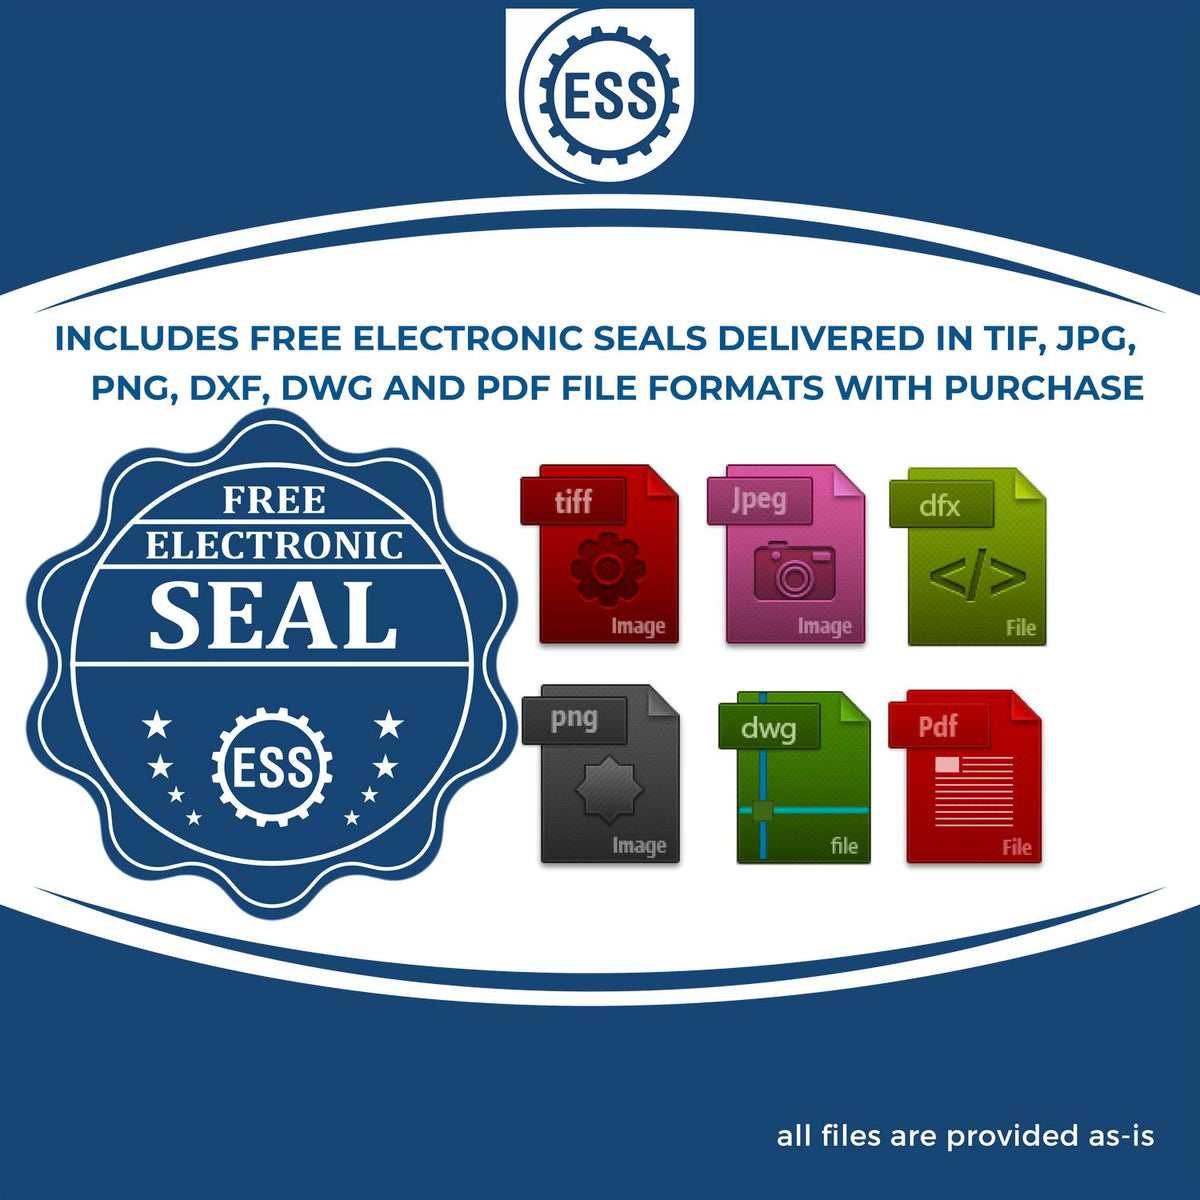 An infographic for the free electronic seal for the Oklahoma Desk Architect Embossing Seal illustrating the different file type icons such as DXF, DWG, TIF, JPG and PNG.